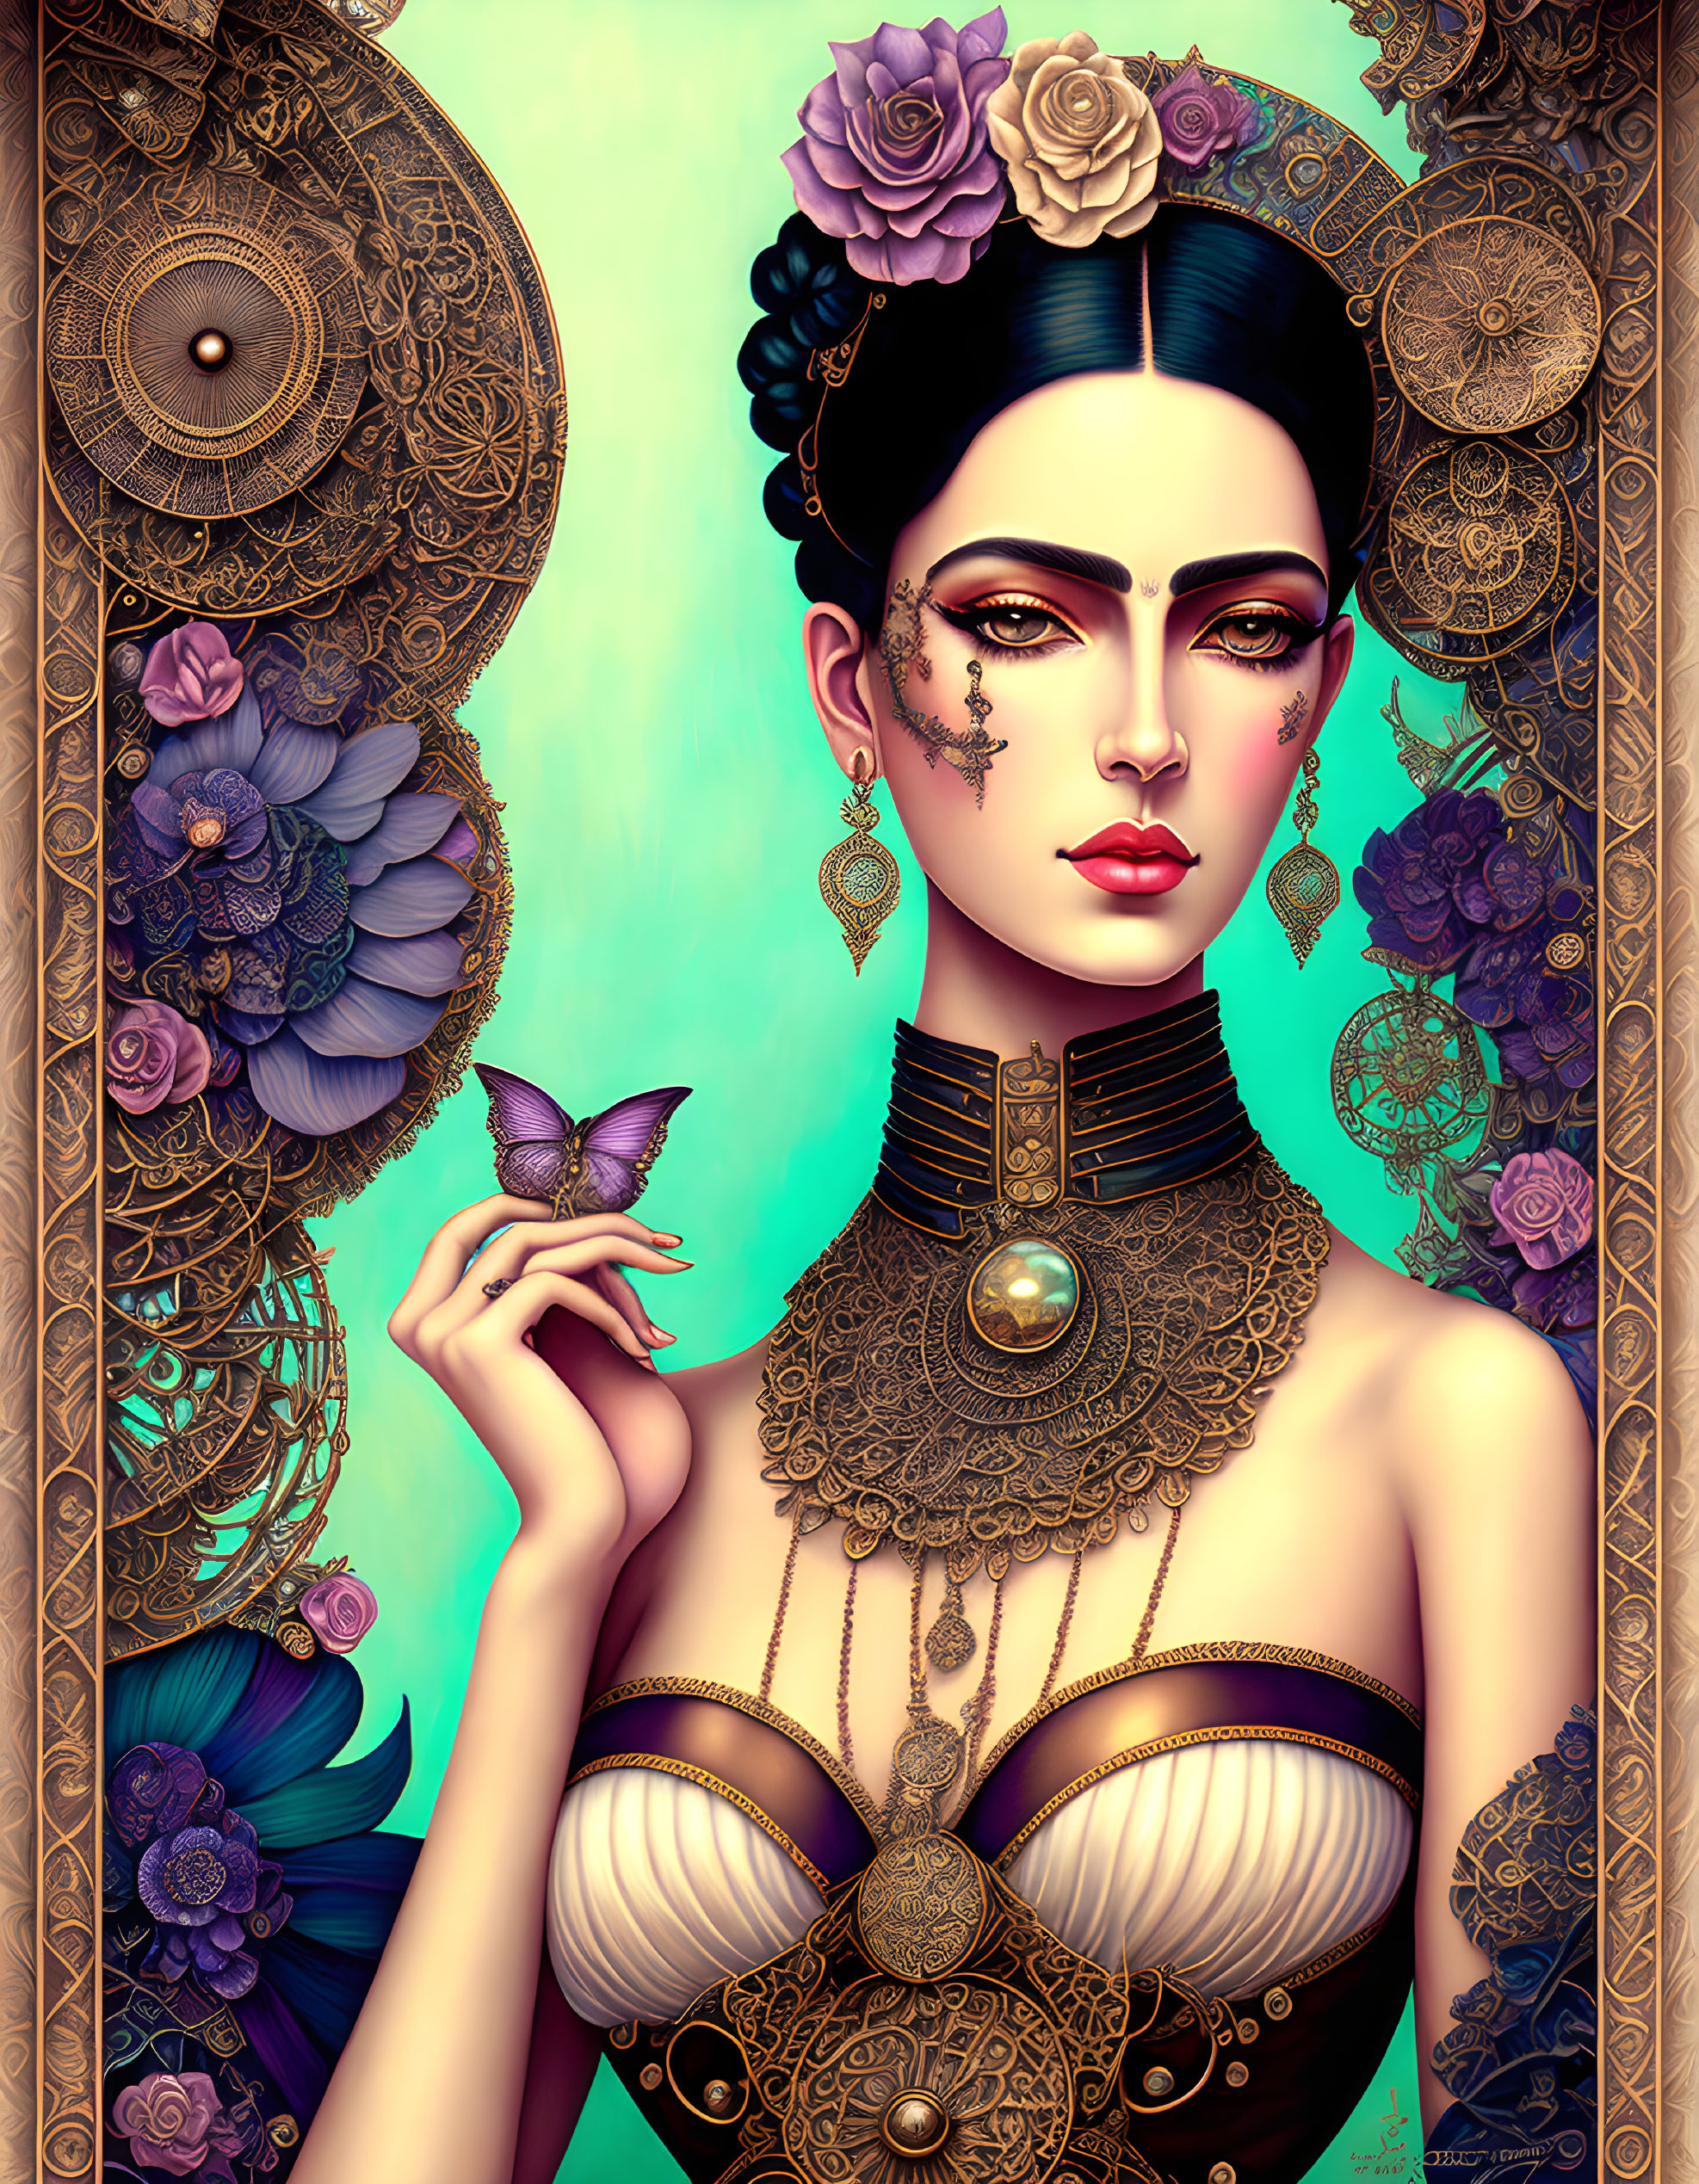 Intricate portrait of woman with golden jewelry, blue flowers, butterfly, and mandala designs